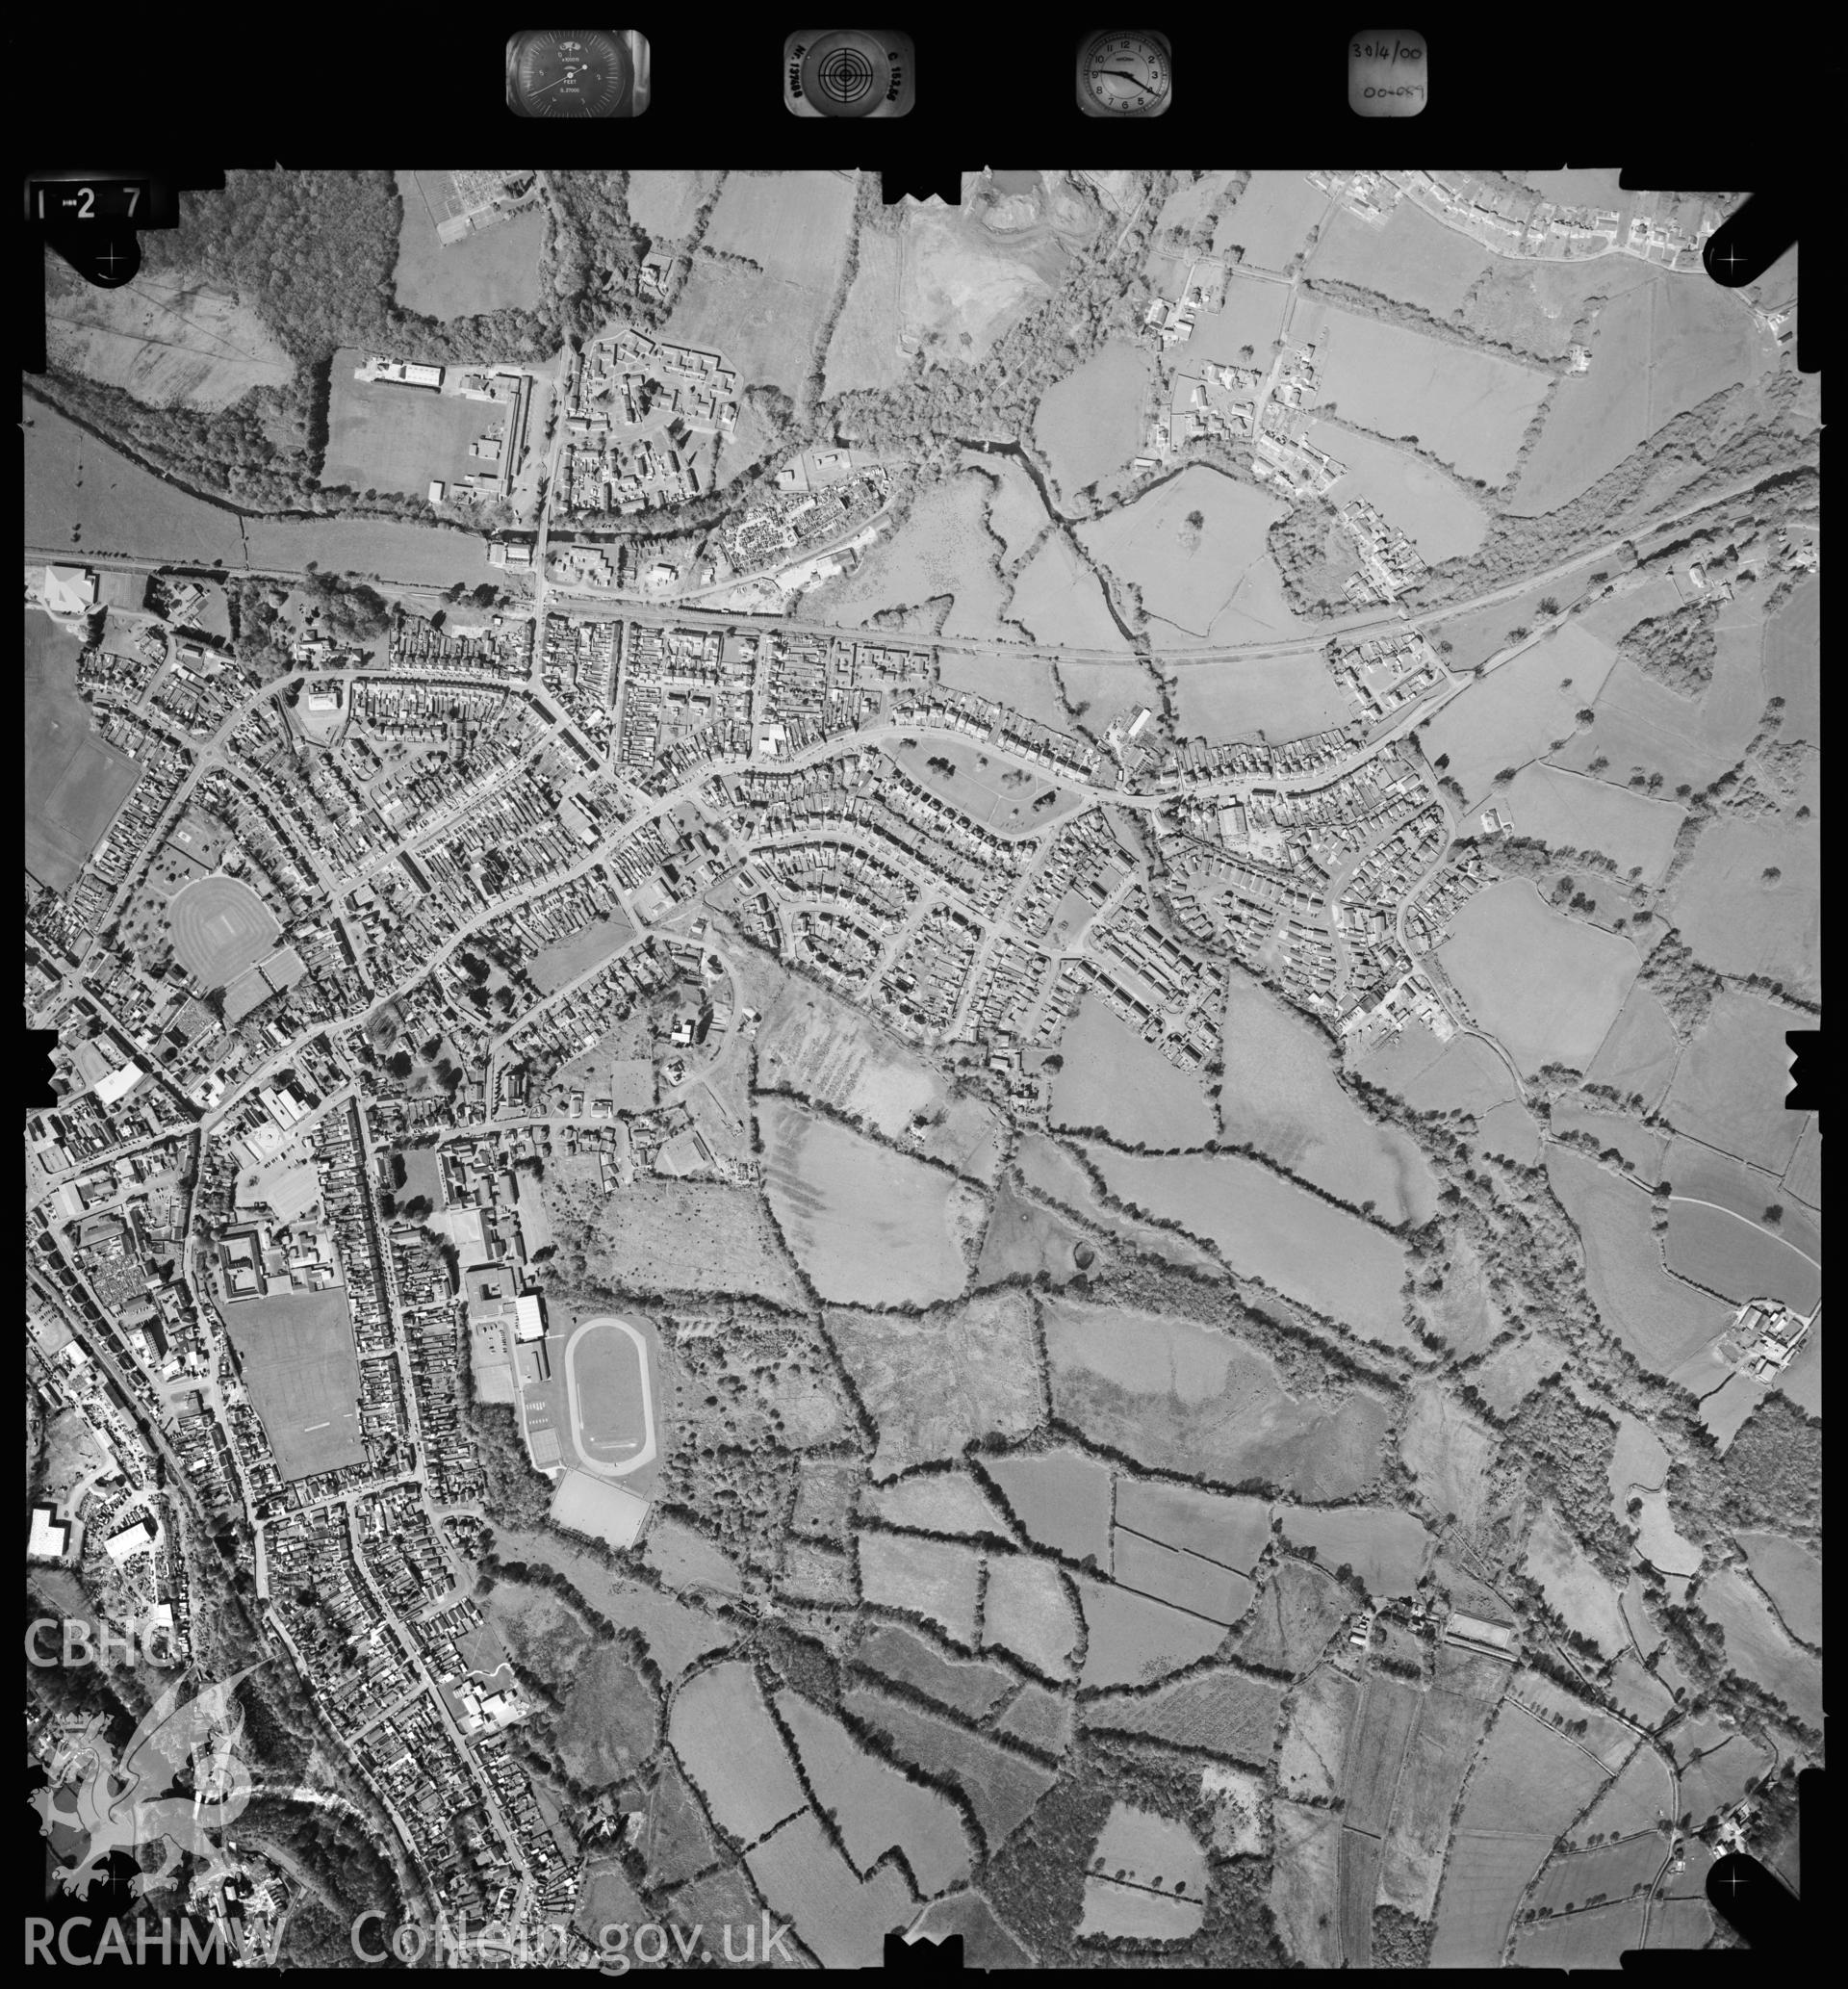 Digitized copy of an aerial photograph showing Ammanford area, taken by Ordnance Survey, 2000.